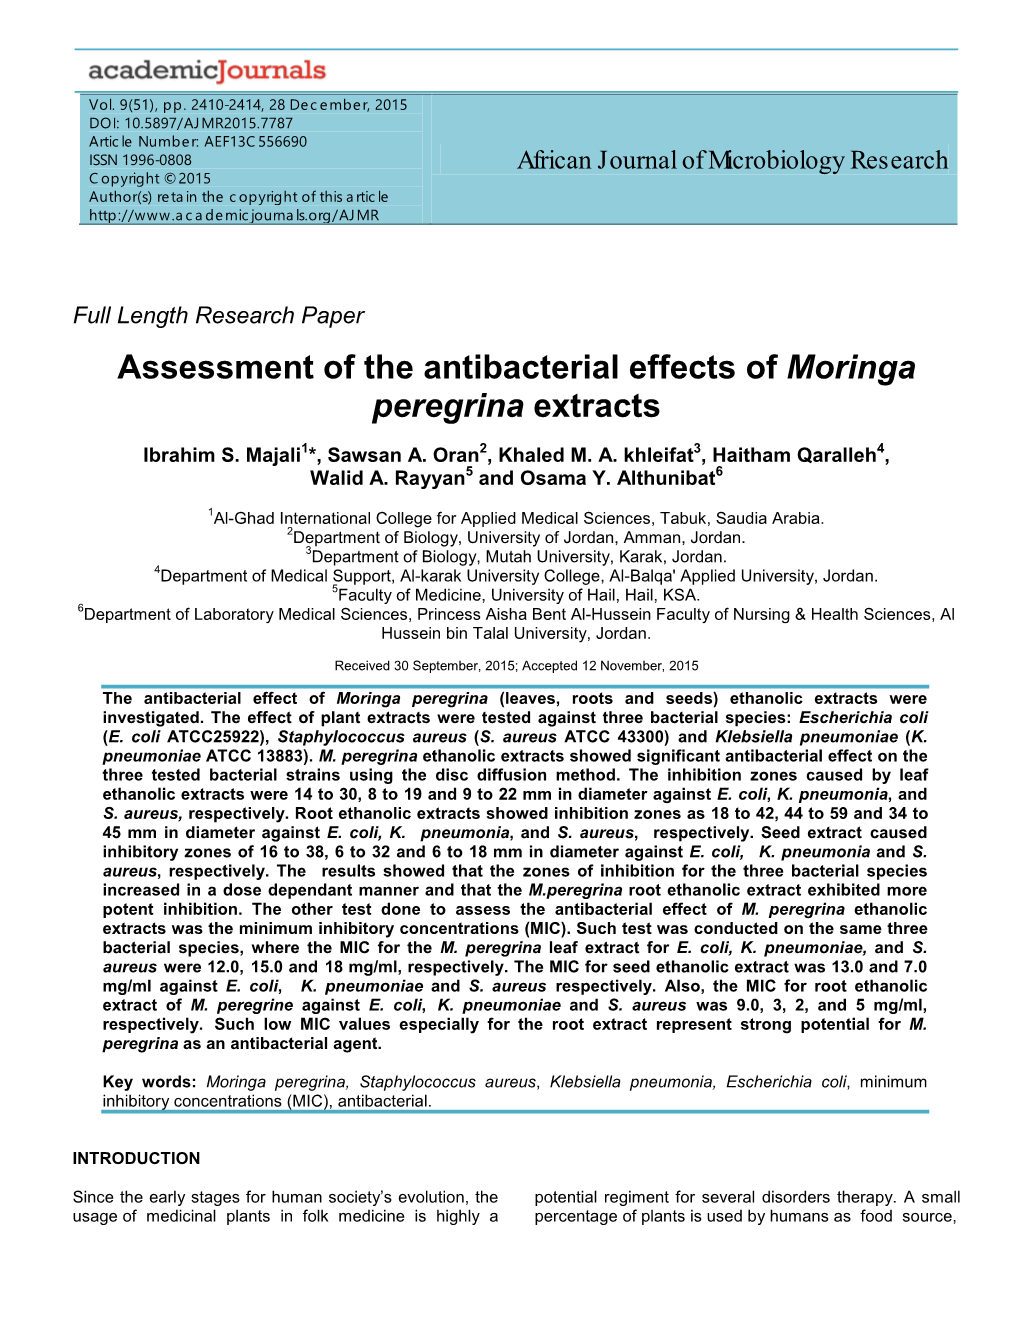 Assessment of the Antibacterial Effects of Moringa Peregrina Extracts